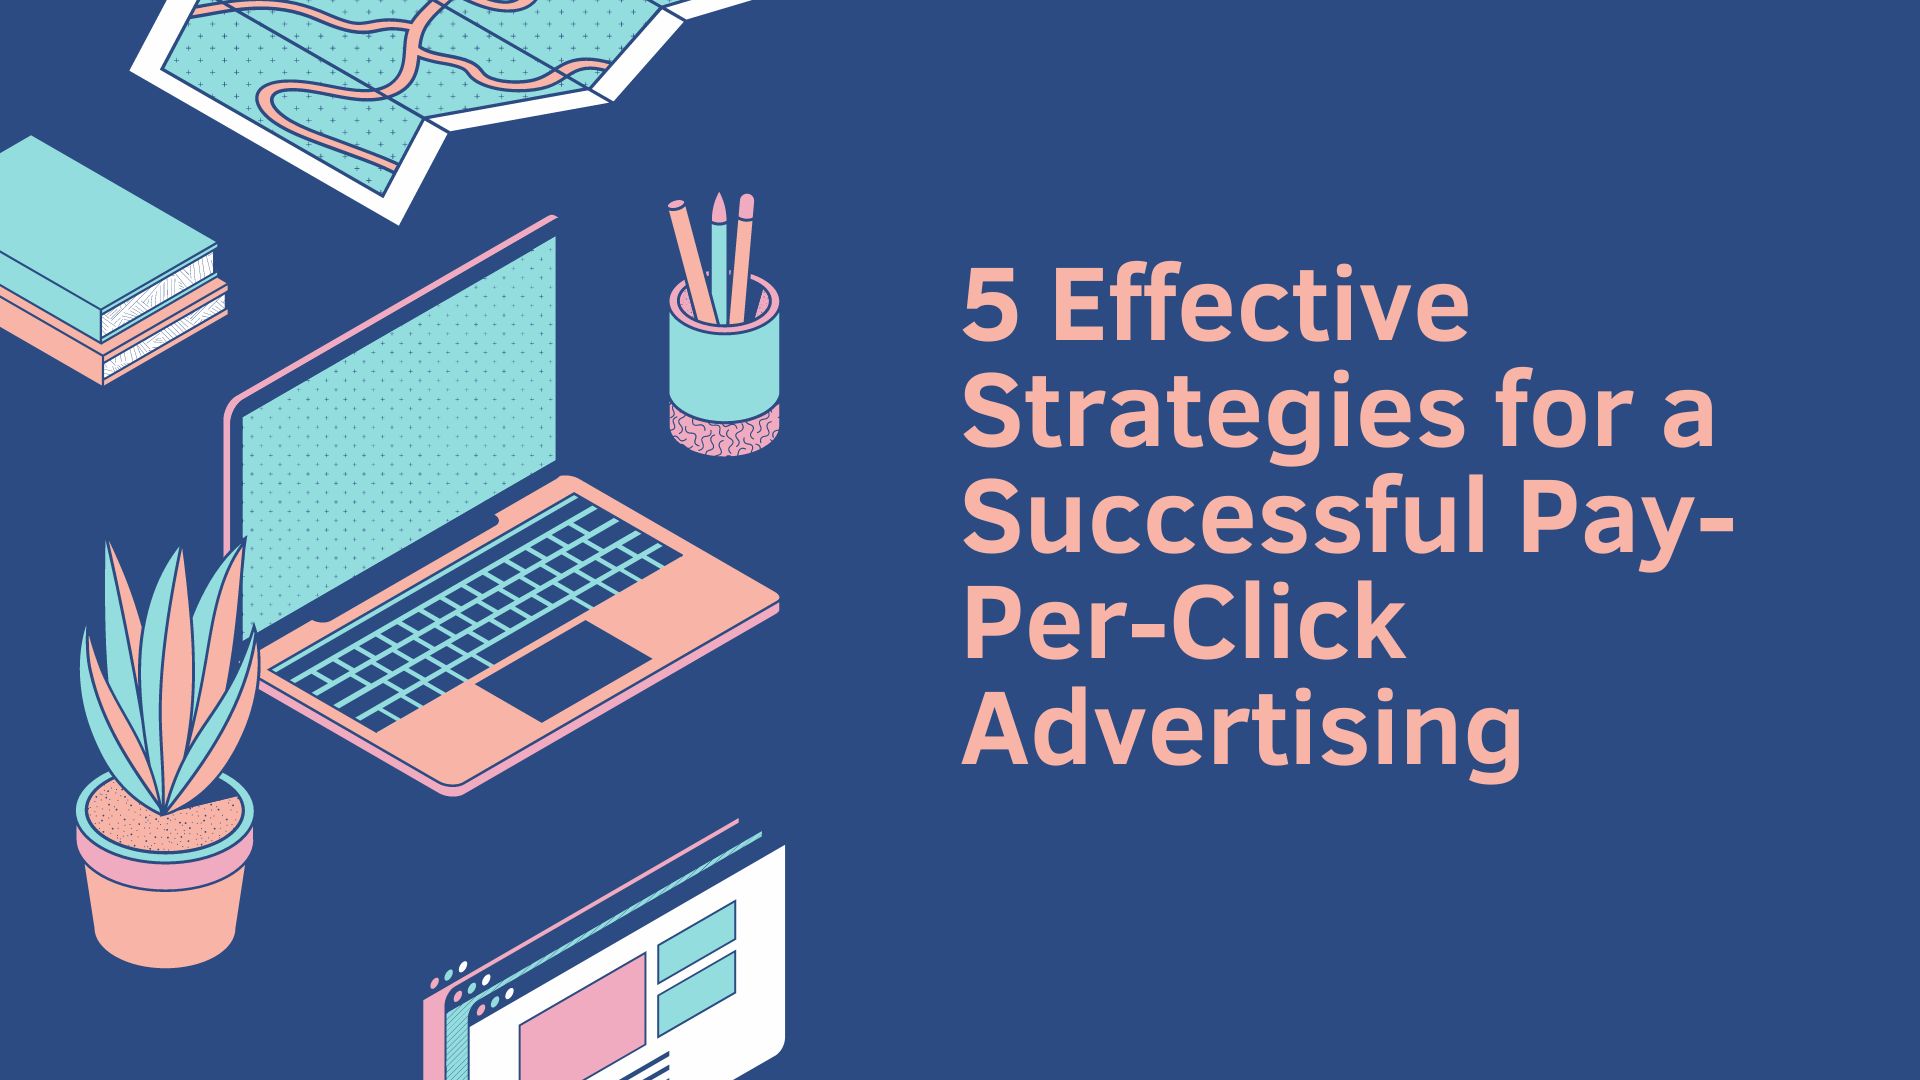 5 Effective Strategies for Pay-Per-Click Advertising